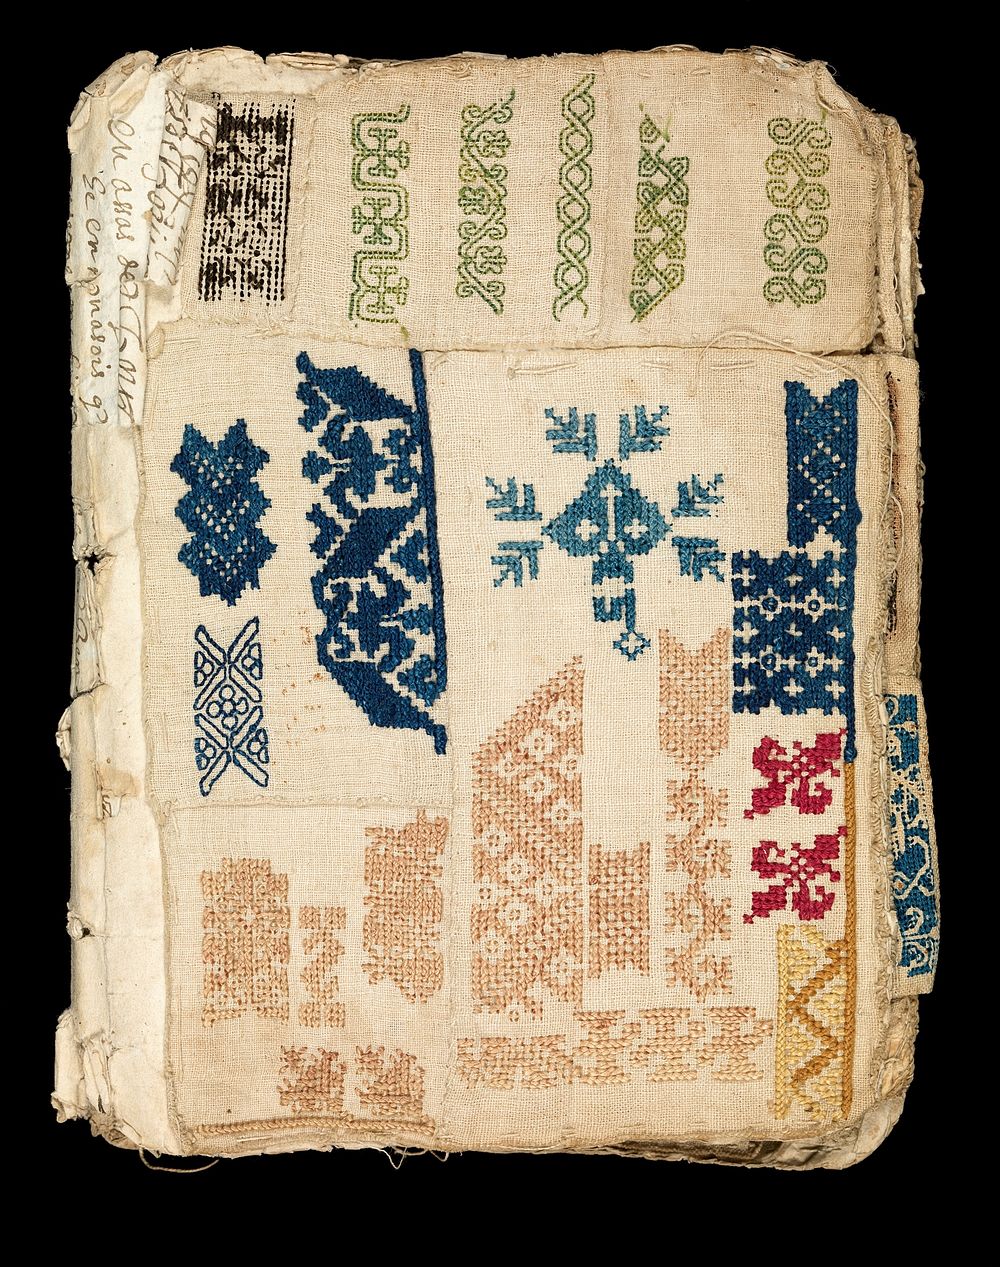 Booklet of embroidery and drawnwork